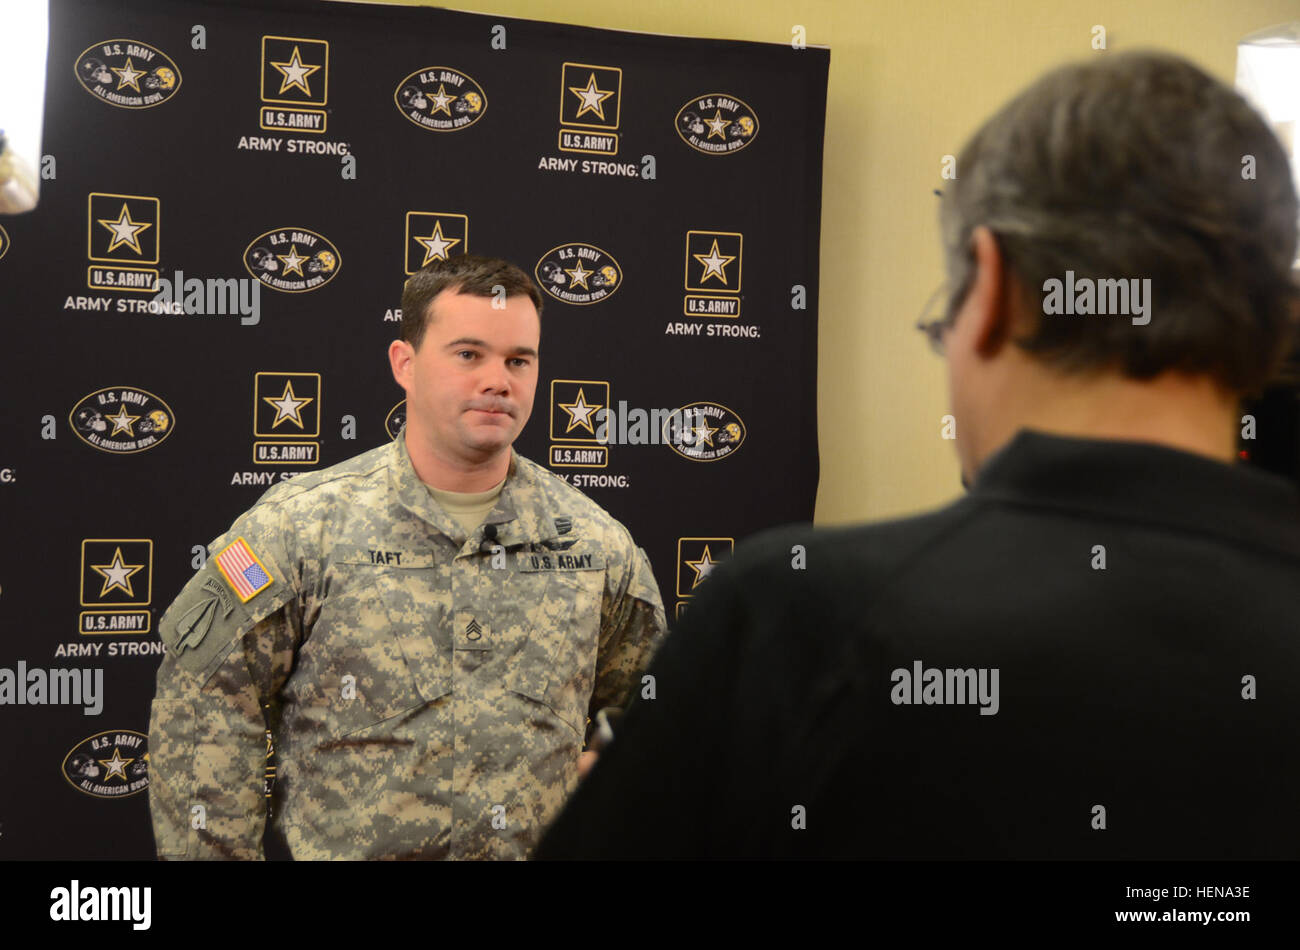 Staff Sgt. Matthew E. Taft takes part in an media interview with a local news outlet during All American Bowl week in San Antonio, Jan. 1, 2014. Taft, a combat veteran, is an MH-60 helicopter flight instructor at Fort Campbell, Ky. Taft and nine other soldiers from the U.S. Army Special Operations Command are in San Antonio as soldier mentors to 90 of the nation's top high school football stars, along with 125 top high school marching band musicians and Color Guard members. The weeklong event culminates with the Army's All American Bowl football game, the premier high school football game in t Stock Photo